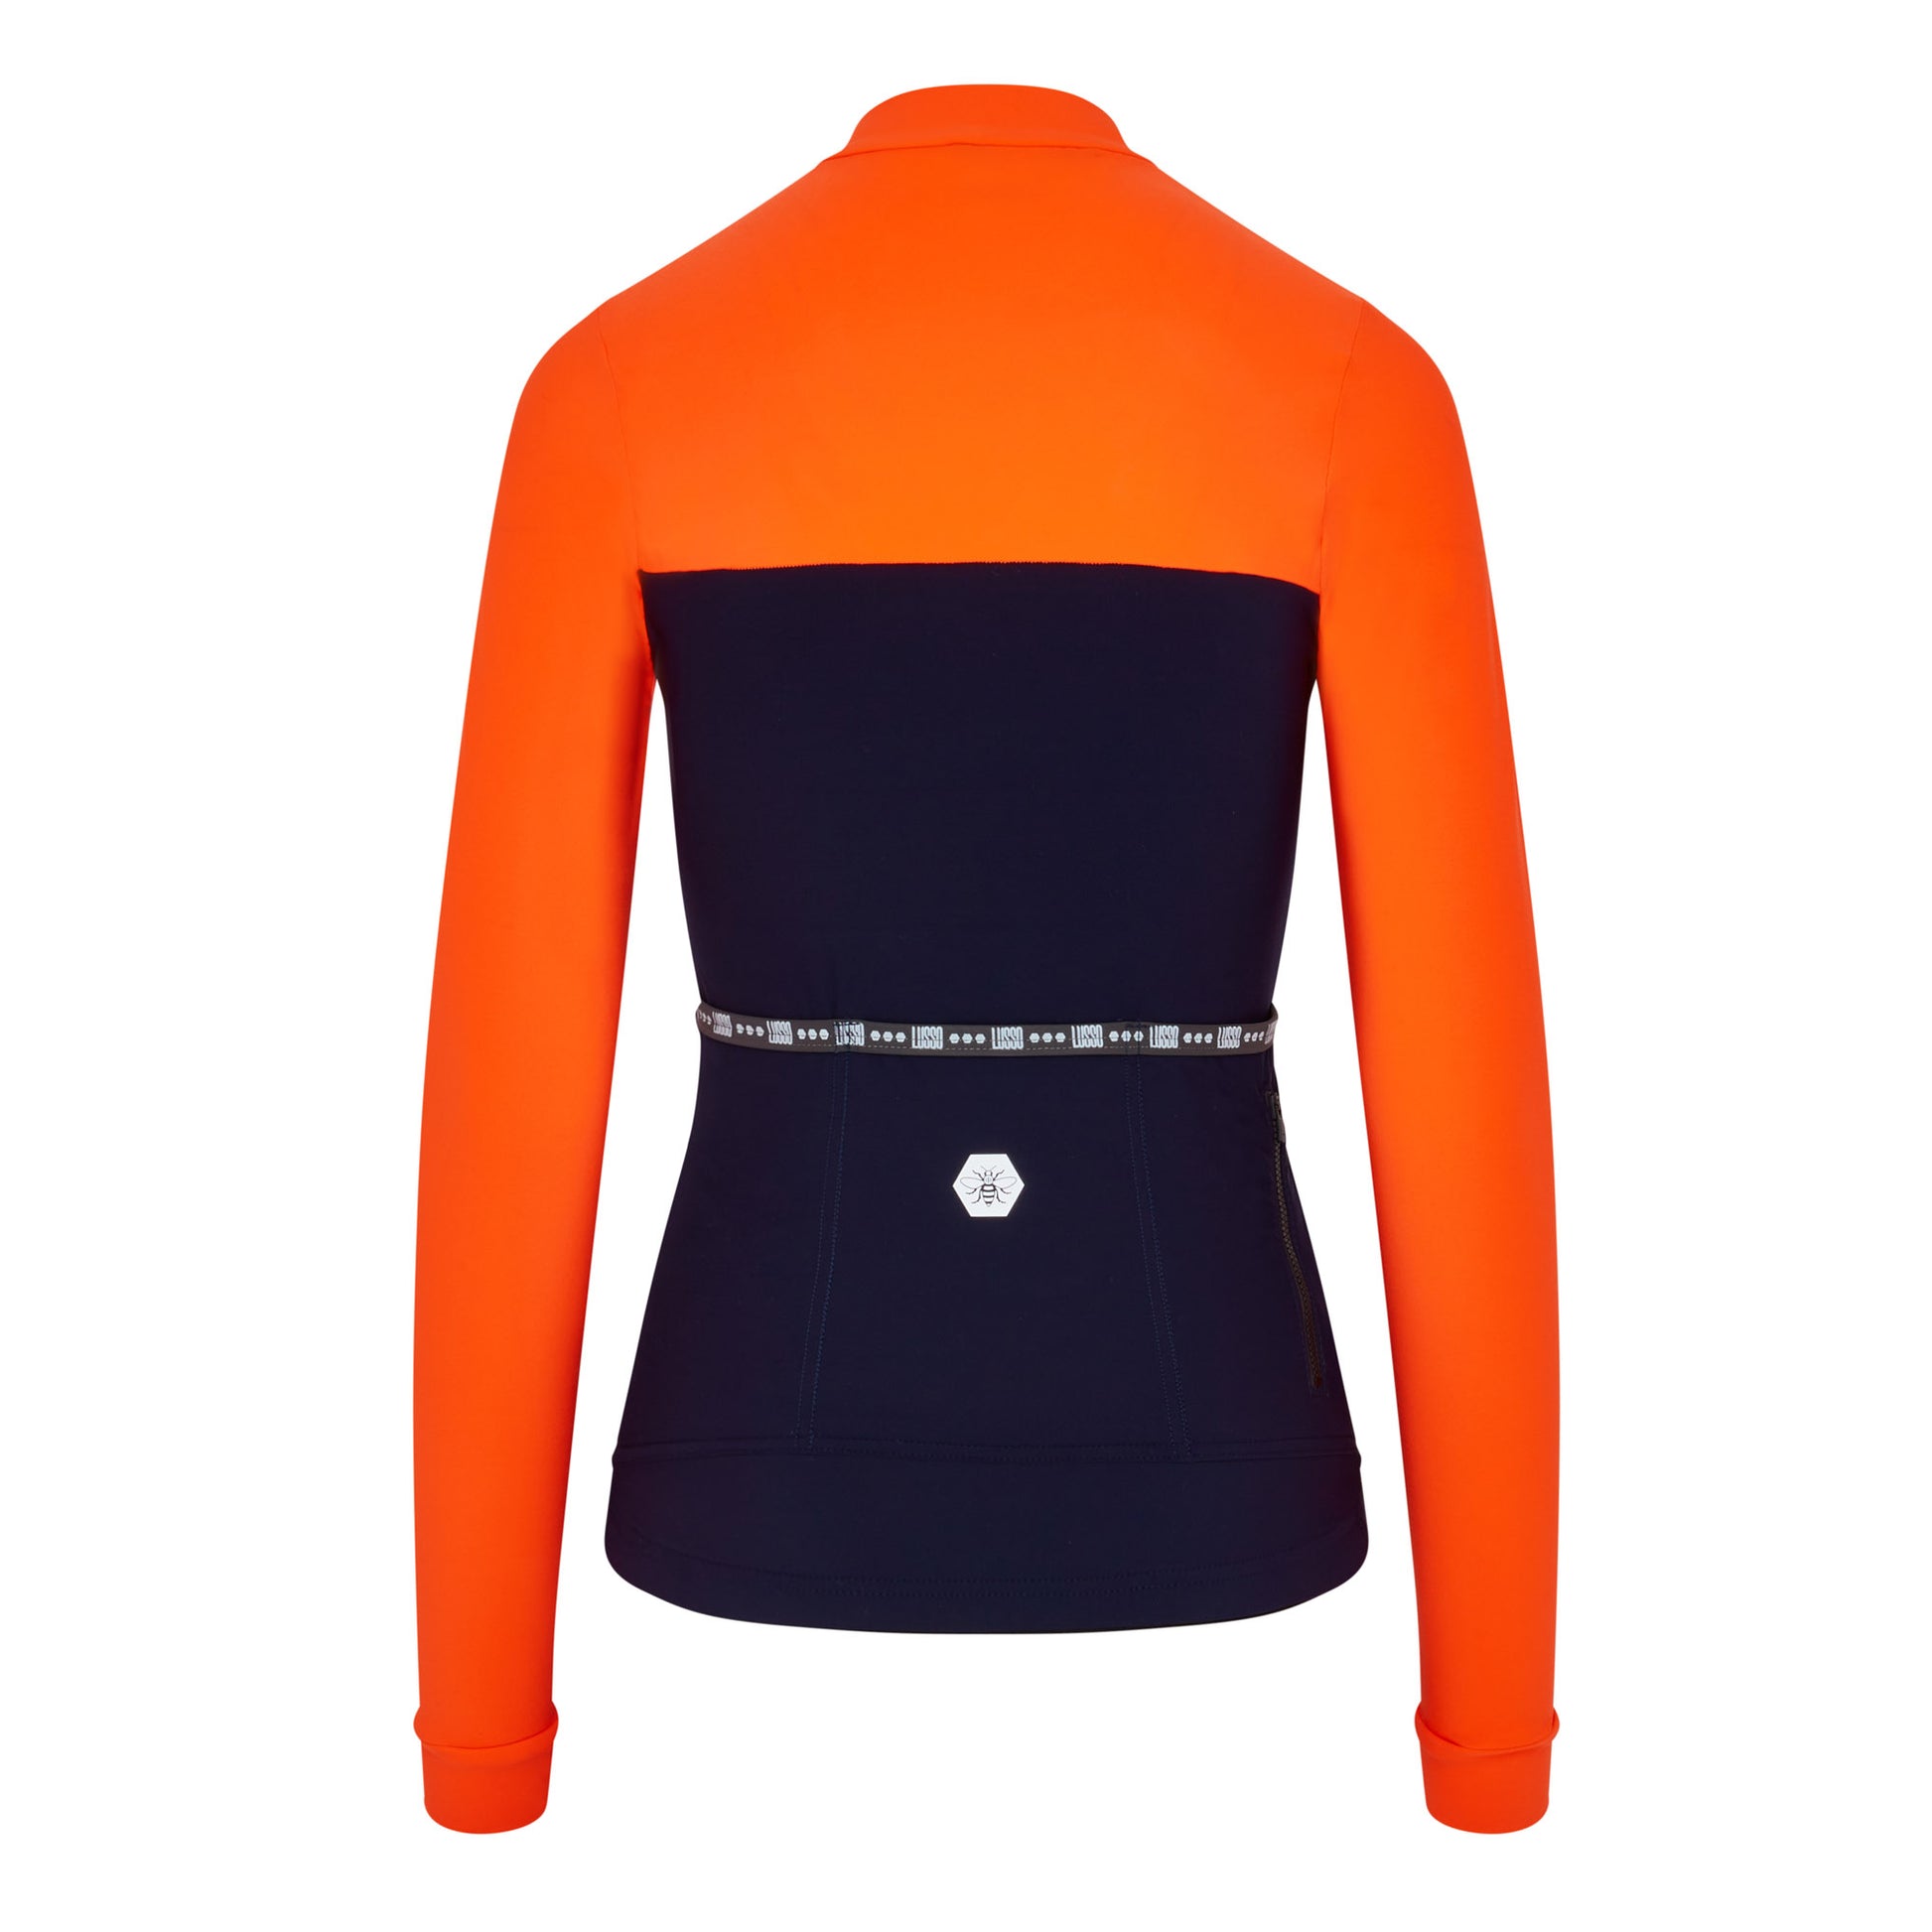 Women’s Paragon Thermal Long Sleeve Jersey - Lusso Cycle Wear